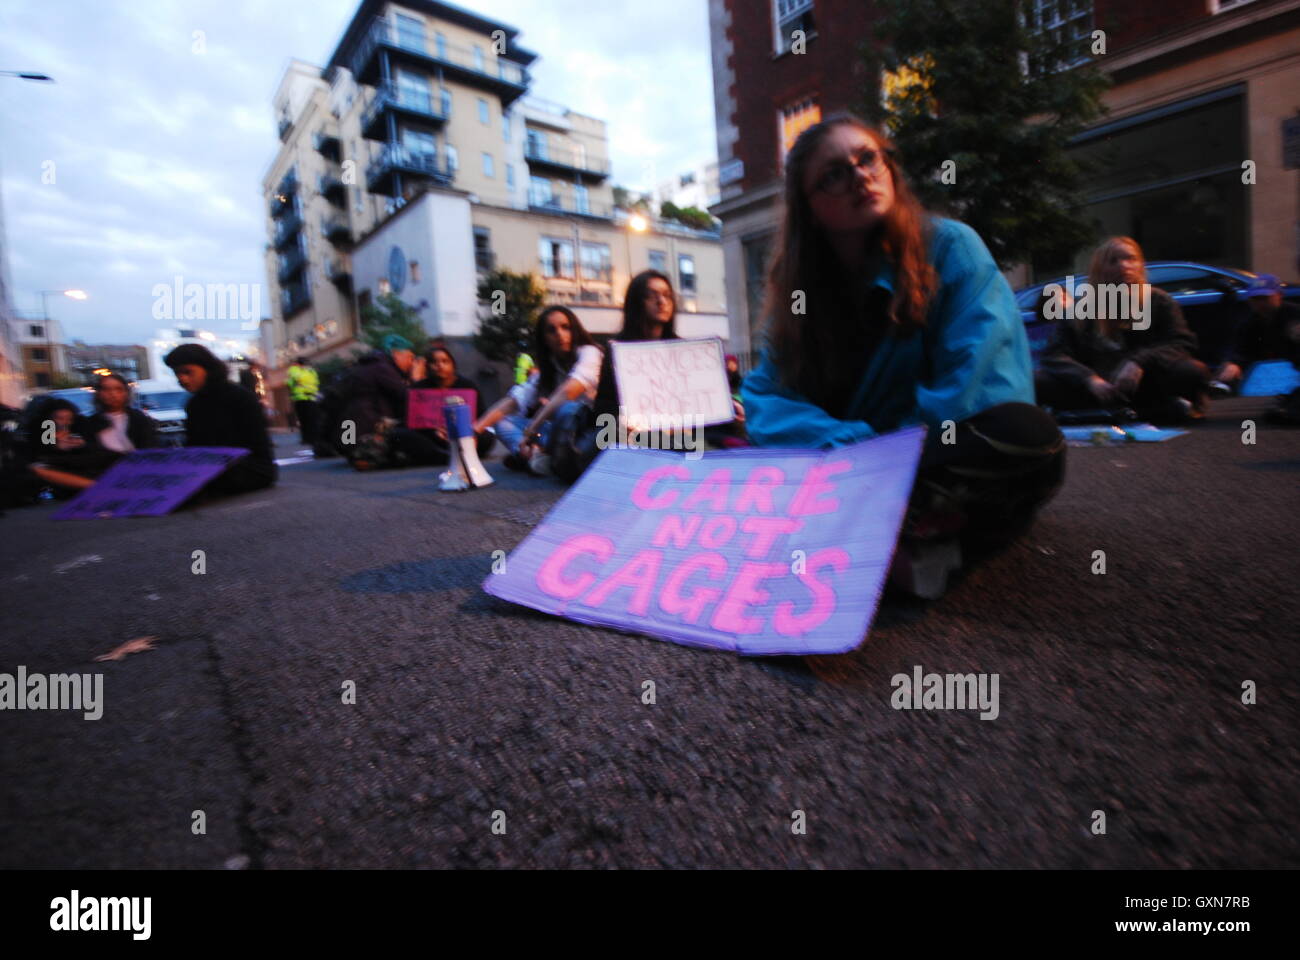 sit down sisters uncut protesting the service supplier G4s, over the running down of prison services. Stock Photo